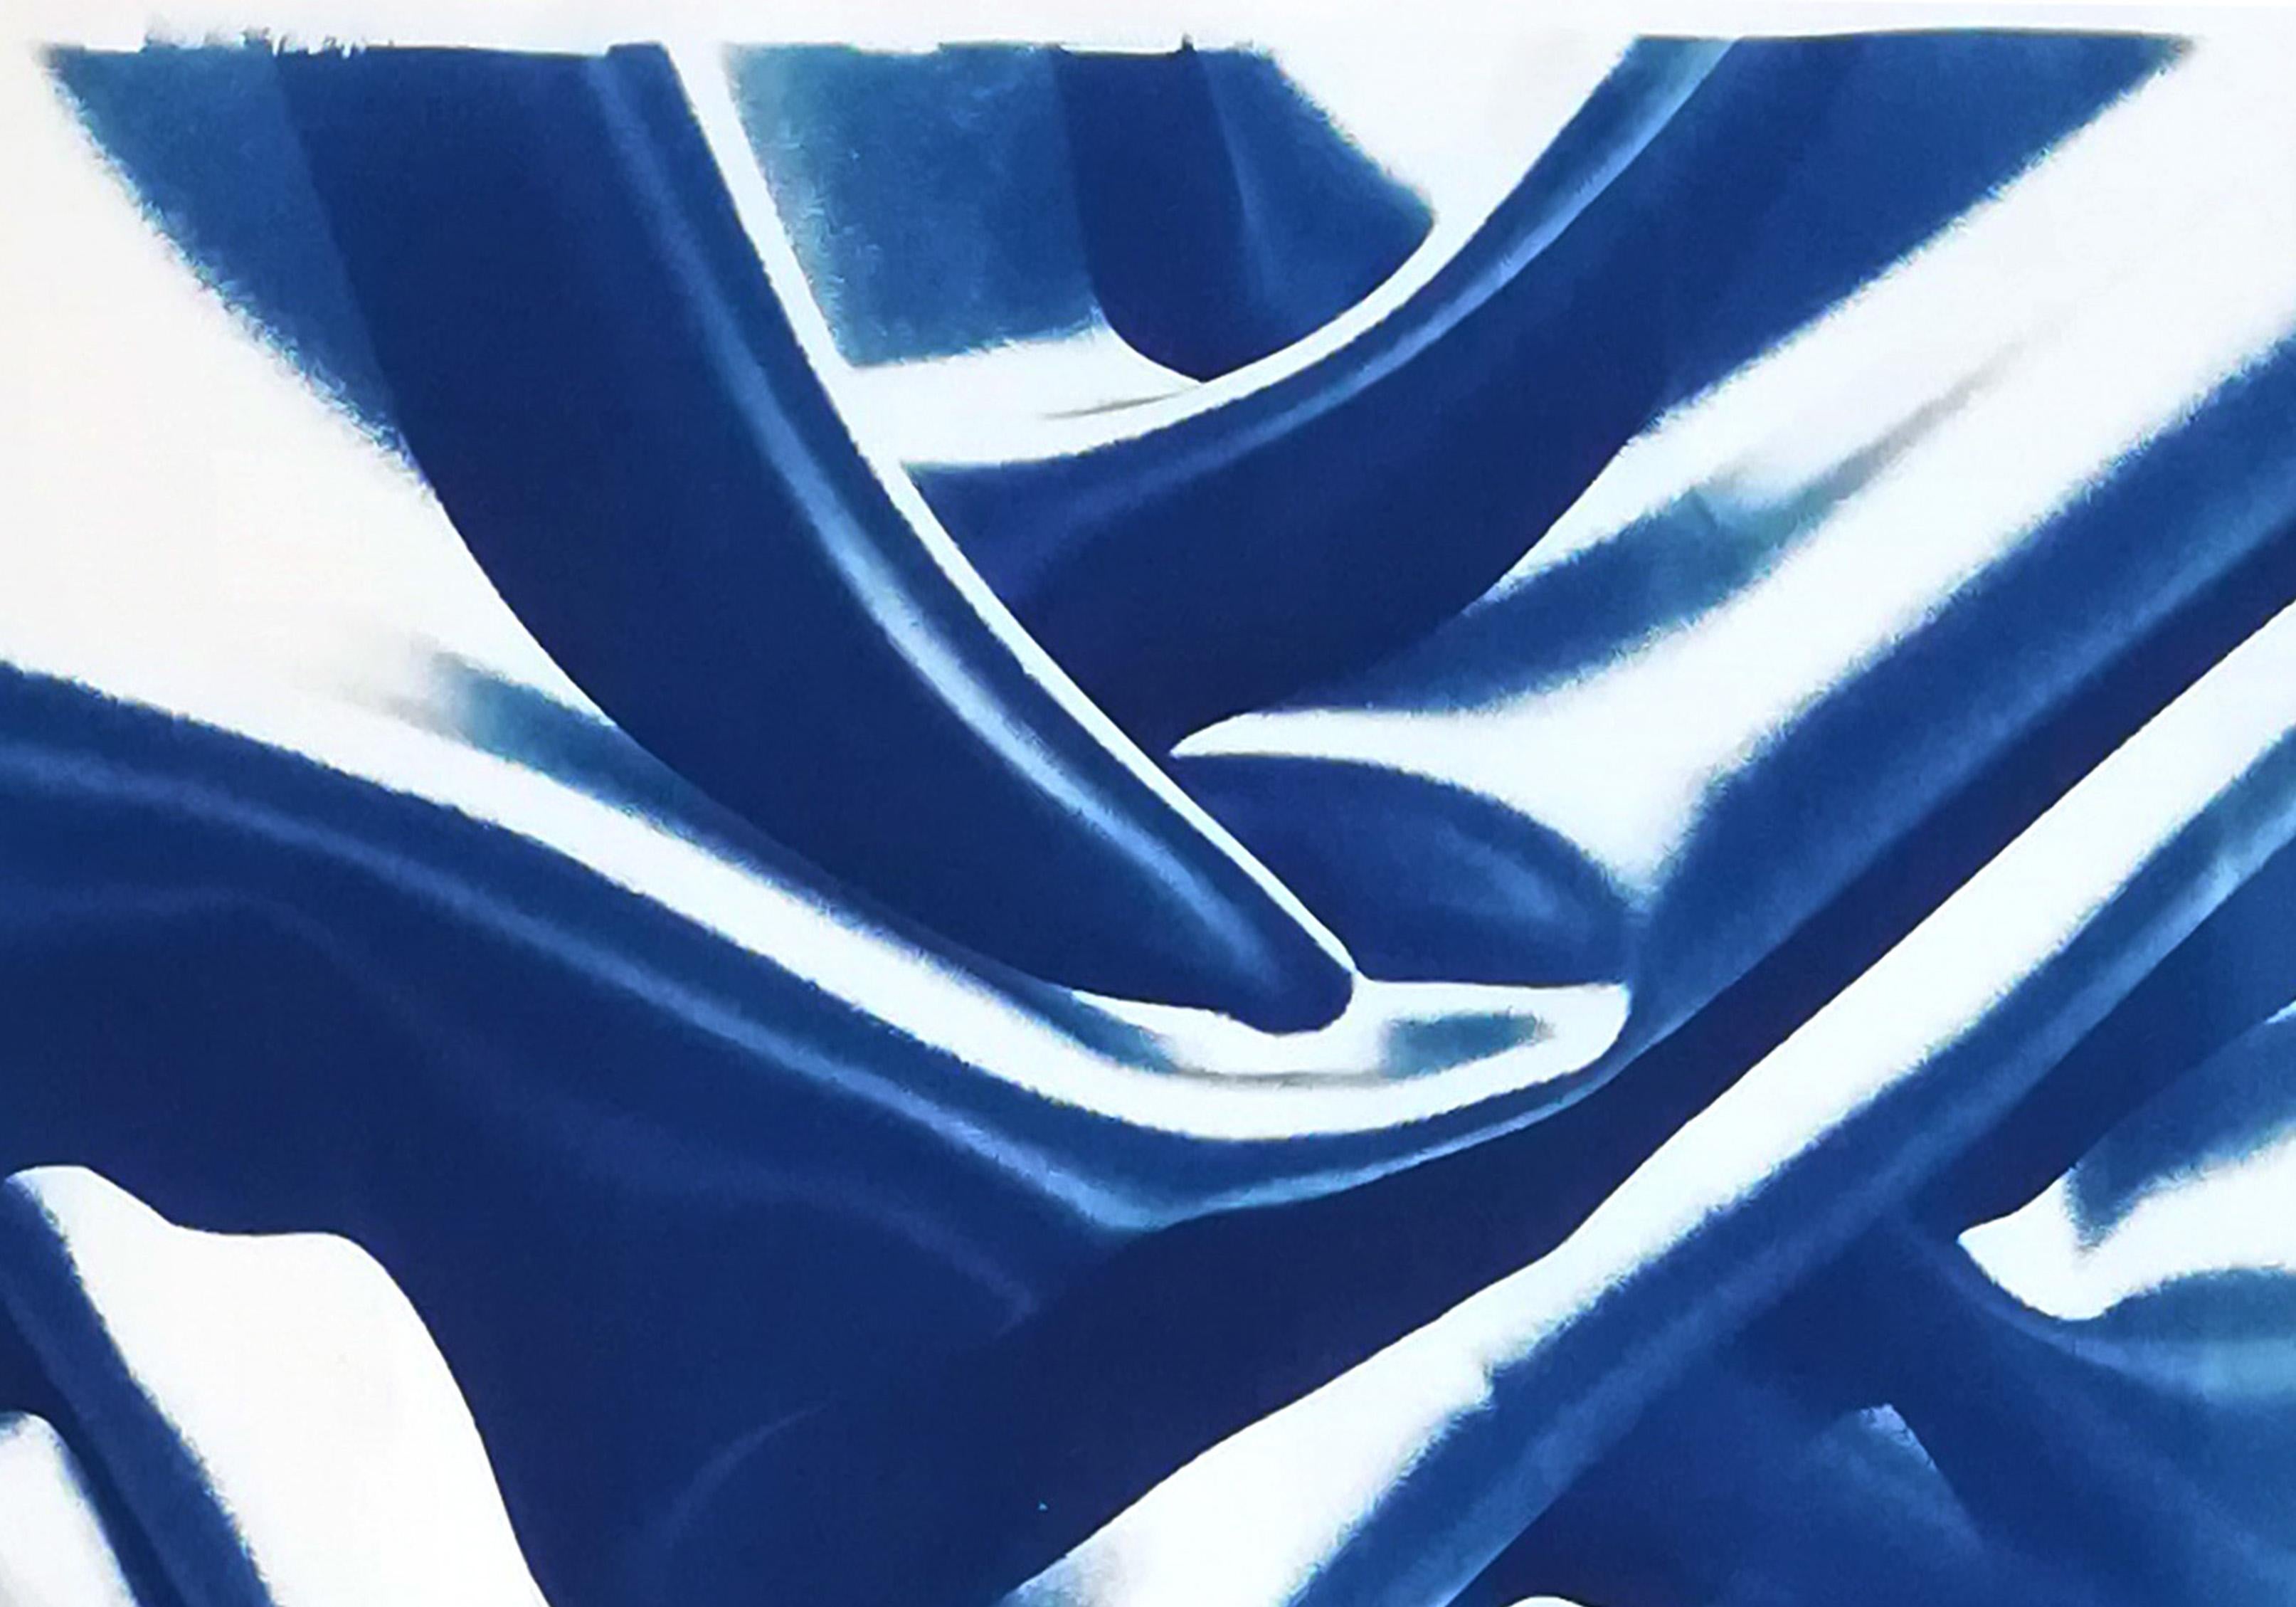 This is an exclusive handprinted limited edition cyanotype.

Details:
+ Title: Late Night Adventurous Duo (of Silks)
+ Year: 2019
+ Edition Size: 20
+ Stamped and Certificate of Authenticity provided
+ Measurements : 100x140 cm (40 x 55 in.) Each